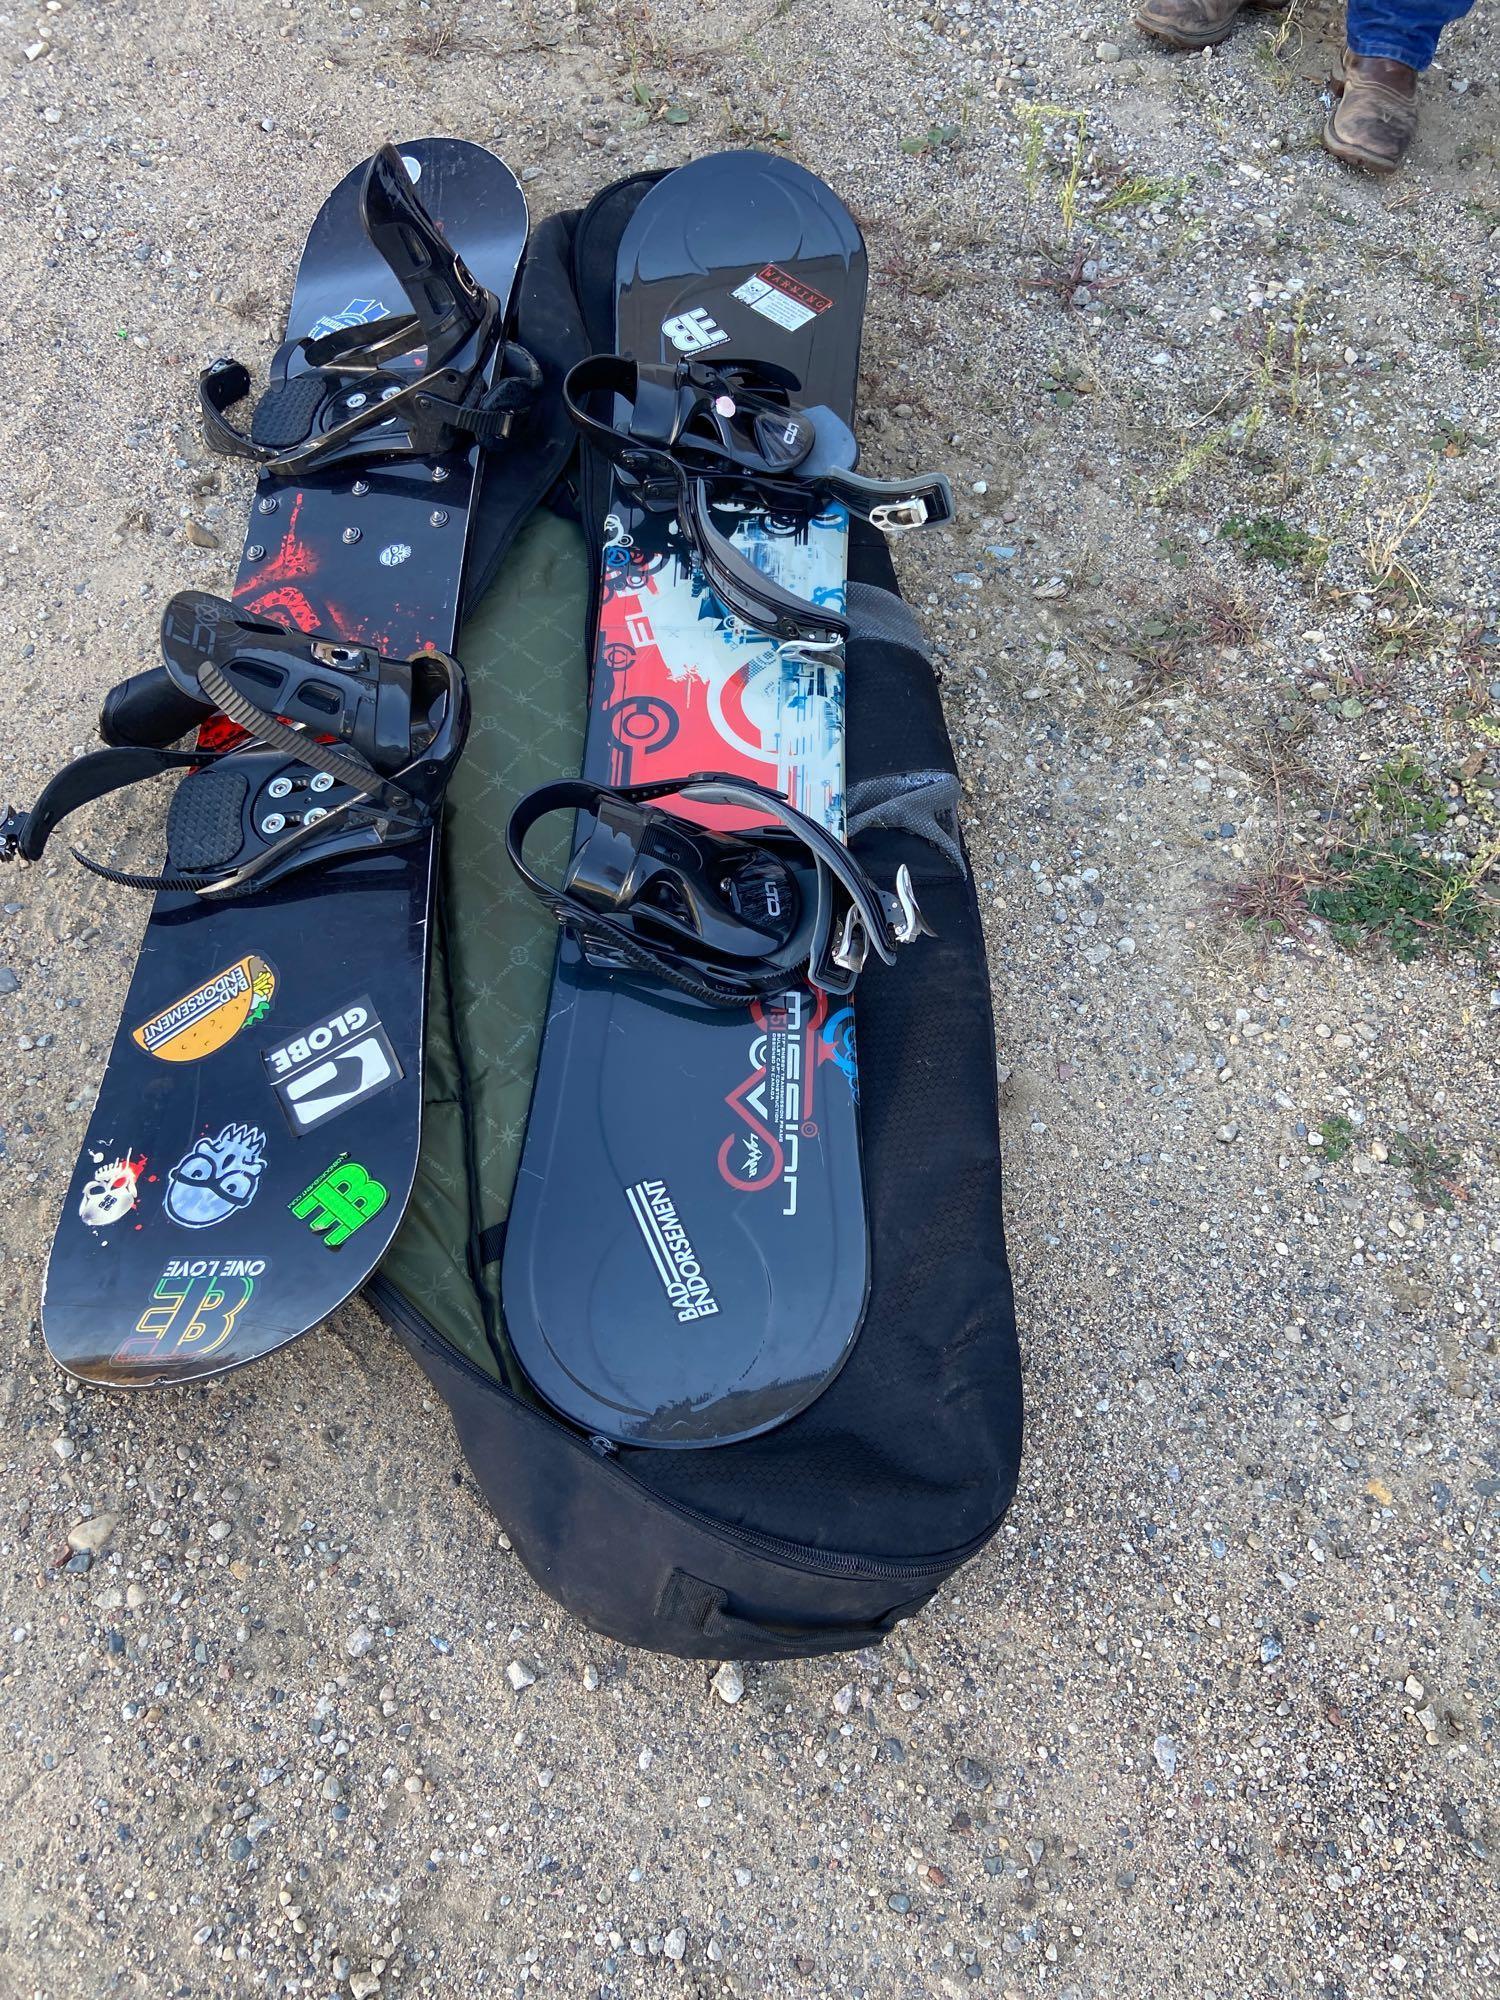 Two snowboards and travel bag